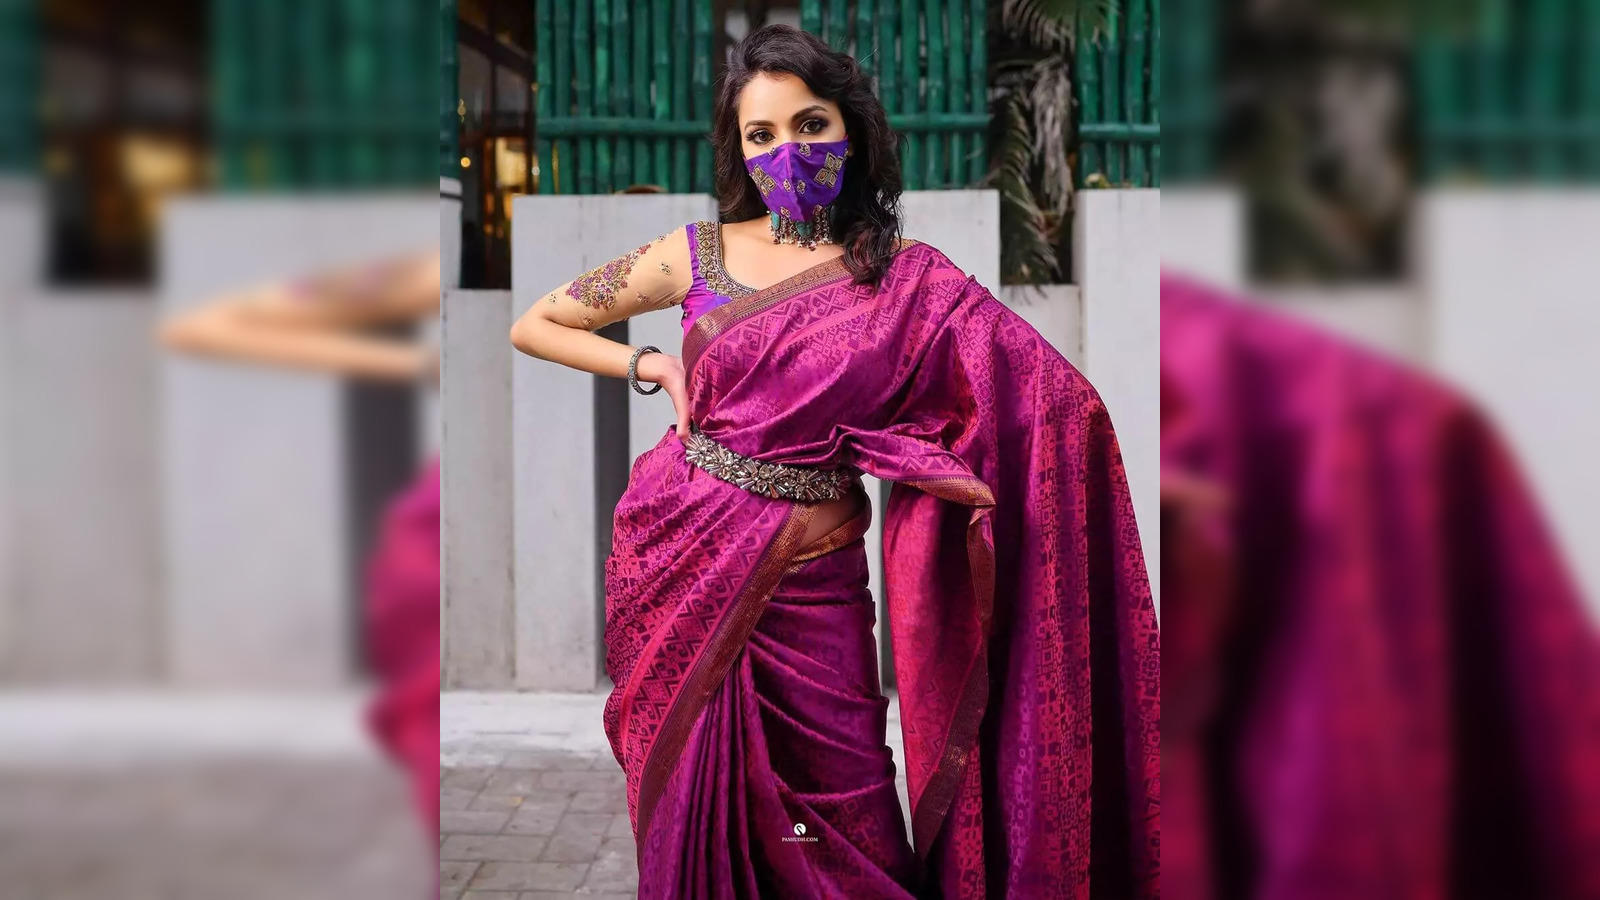 INDIAN OUTFIT POSES FOR THE LOVABLE IG POSTS – KYETH